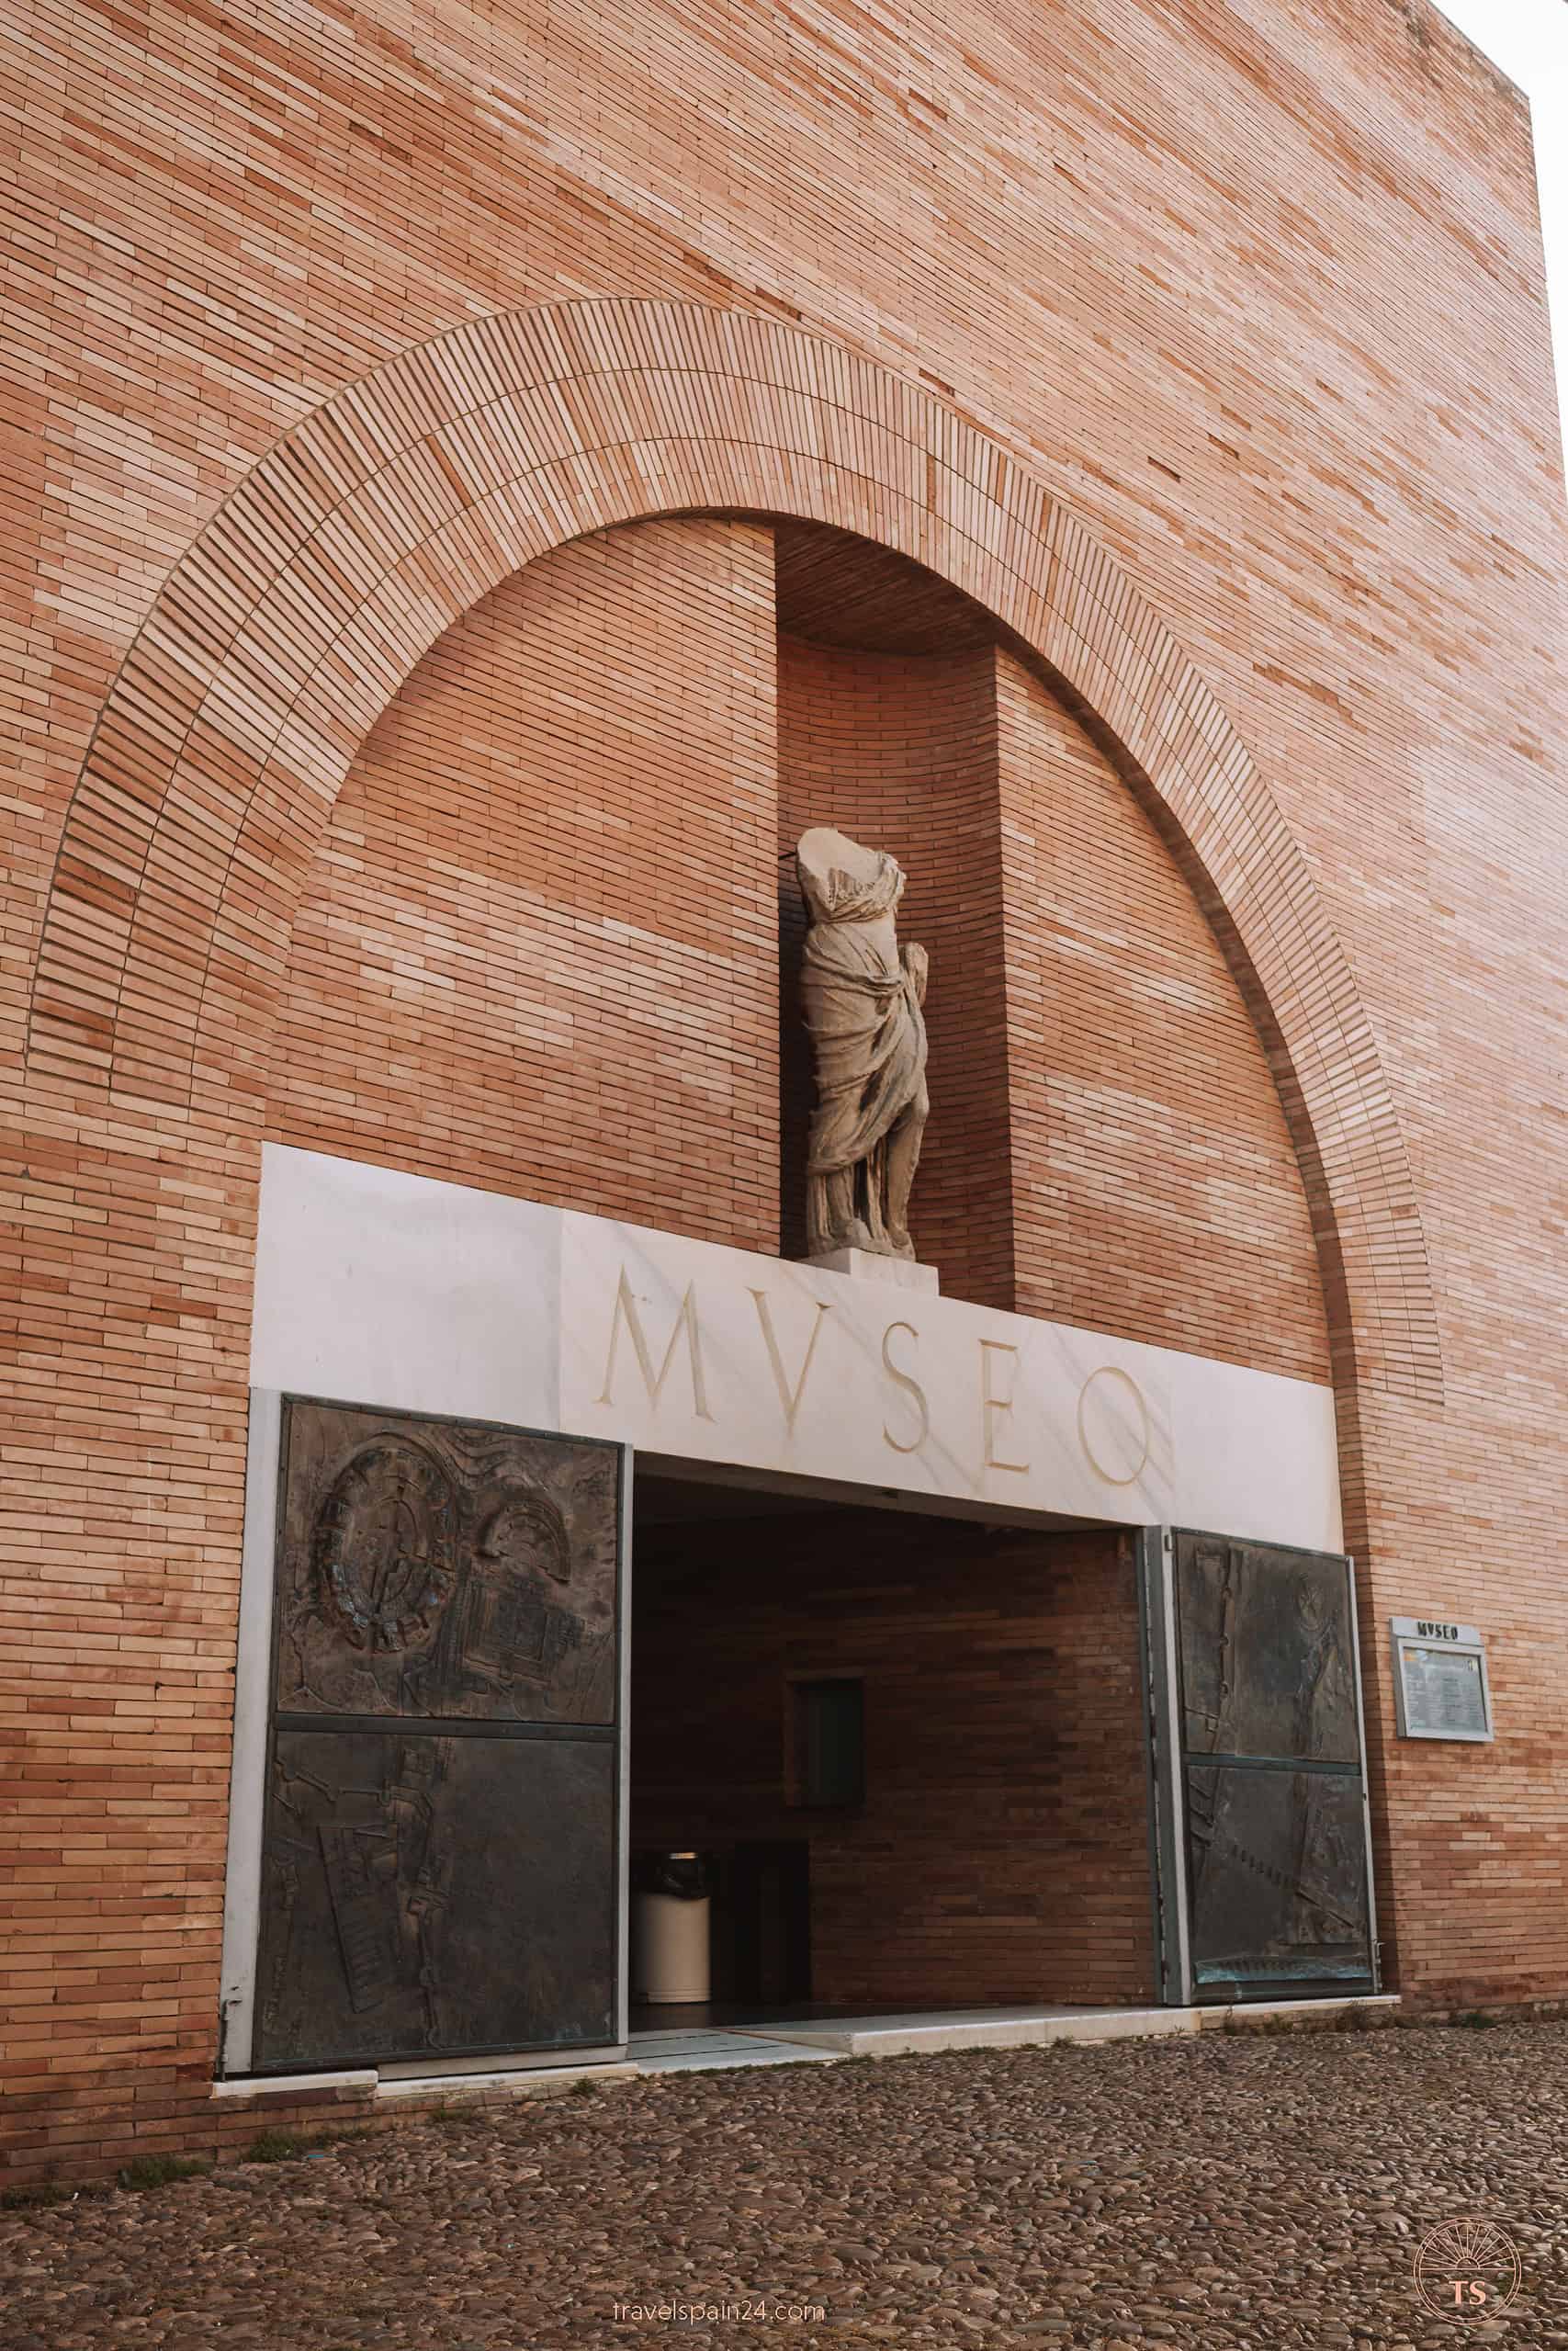 Entrance of the National Museum of Roman Art in Mérida, framed by an arched brick entryway and an ancient Roman statue, inviting visitors to explore further.